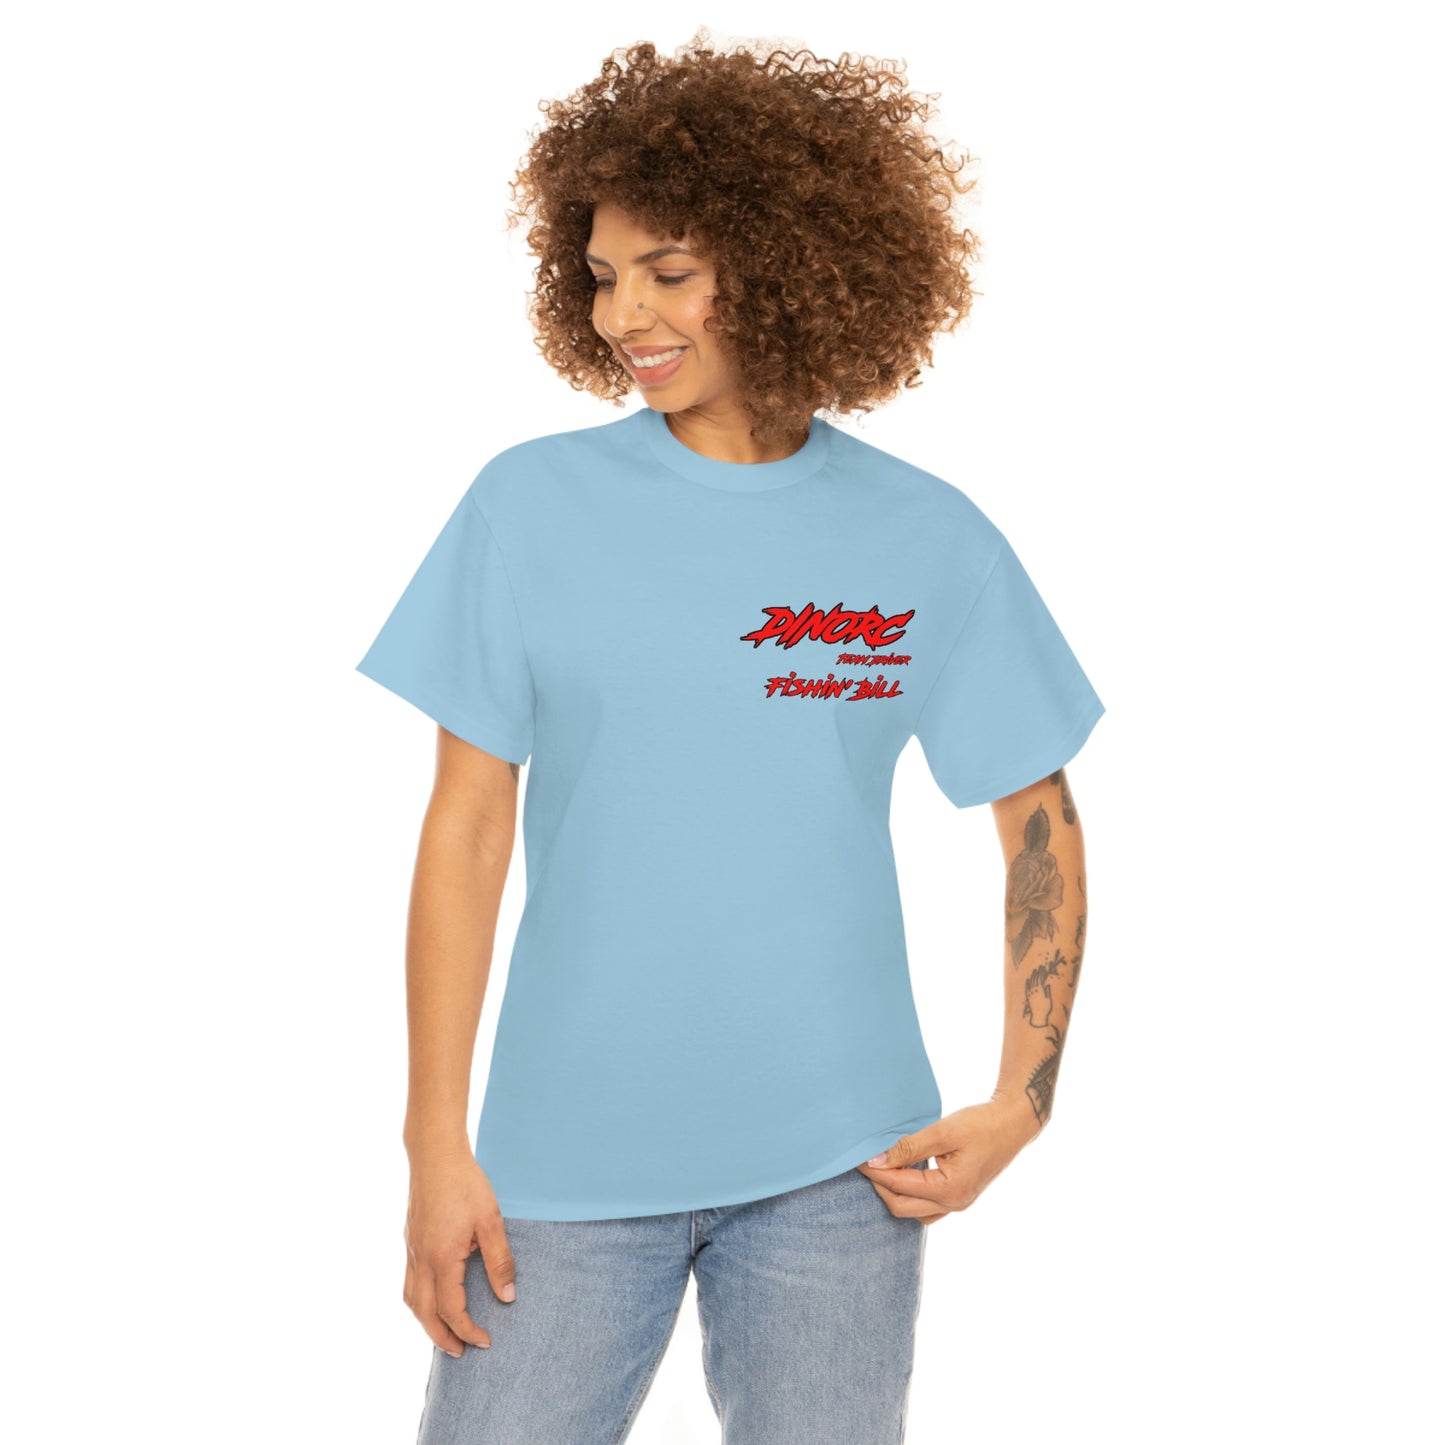 Team Driver Fishin' Bill Front and Back DinoRc Logo T-Shirt S-5x 5 colors